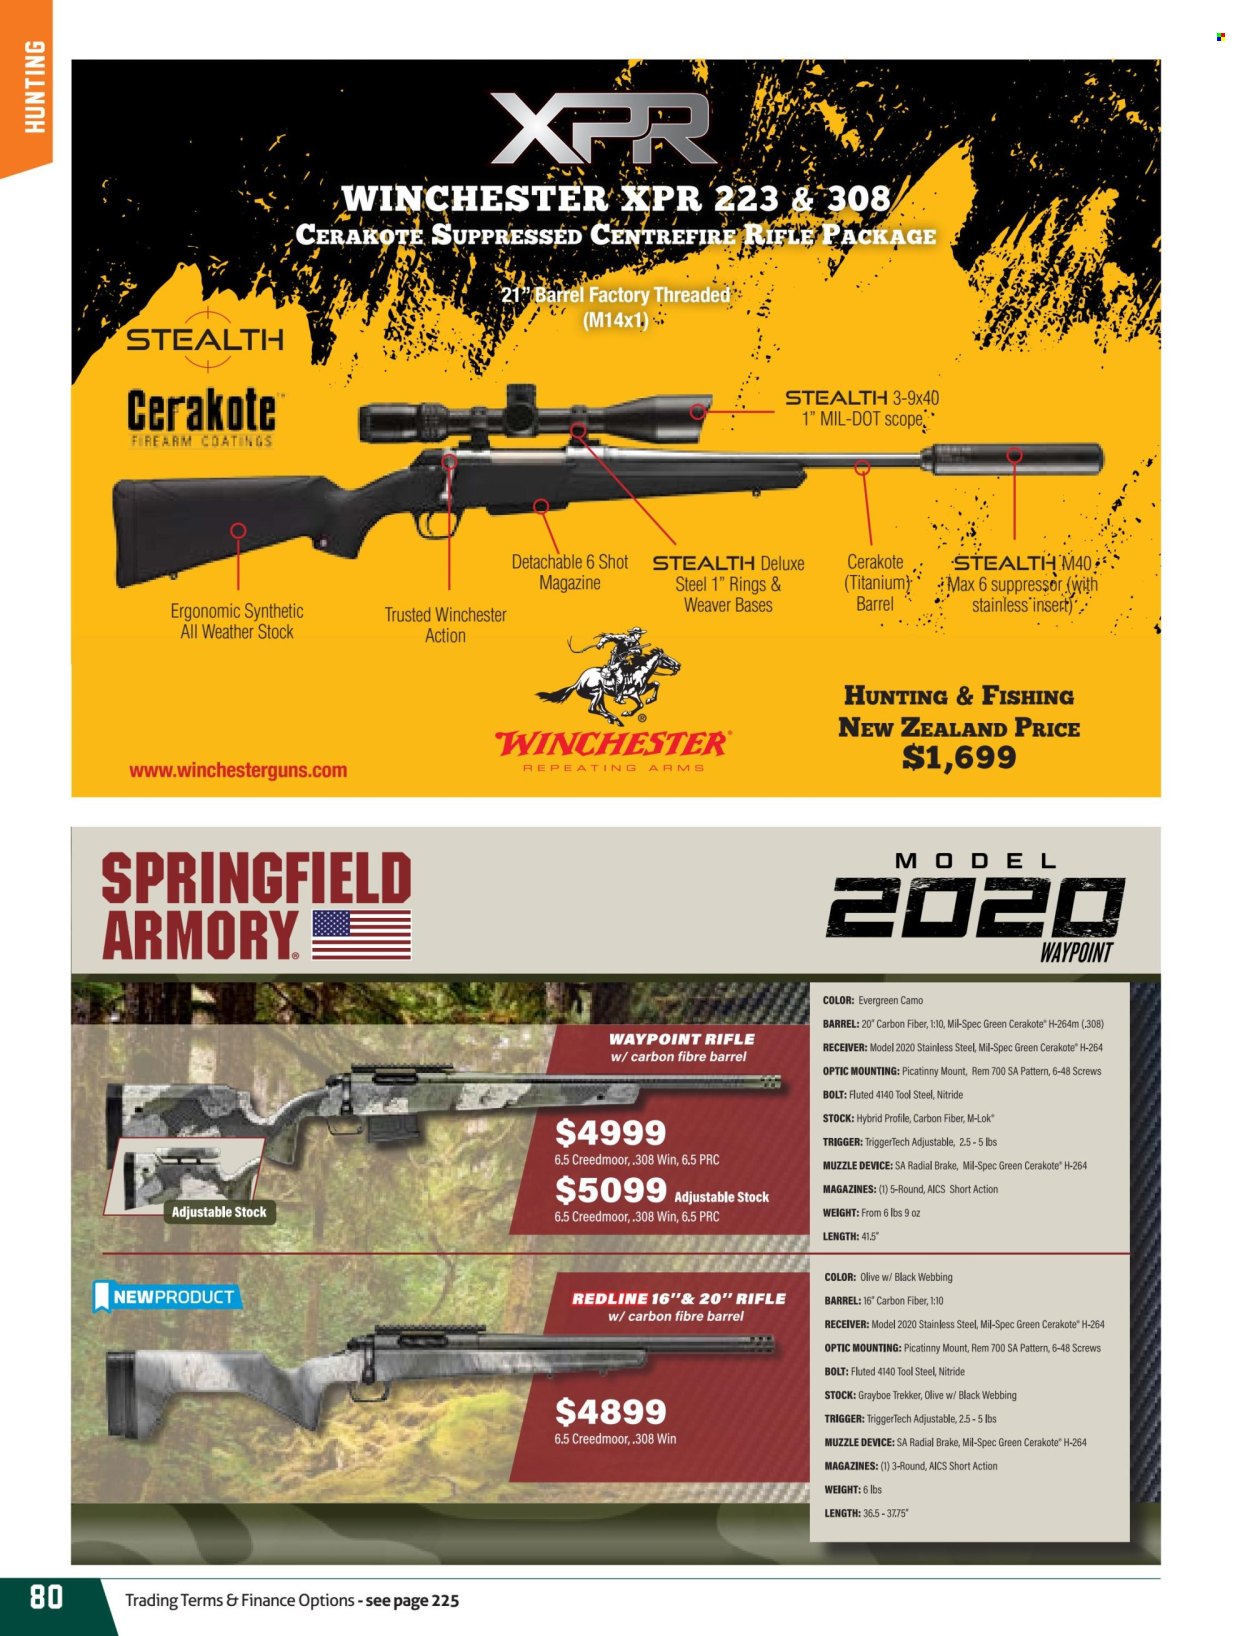 thumbnail - Hunting & Fishing mailer - Sales products - rifle, Springfield Armory, scope, ammo. Page 80.